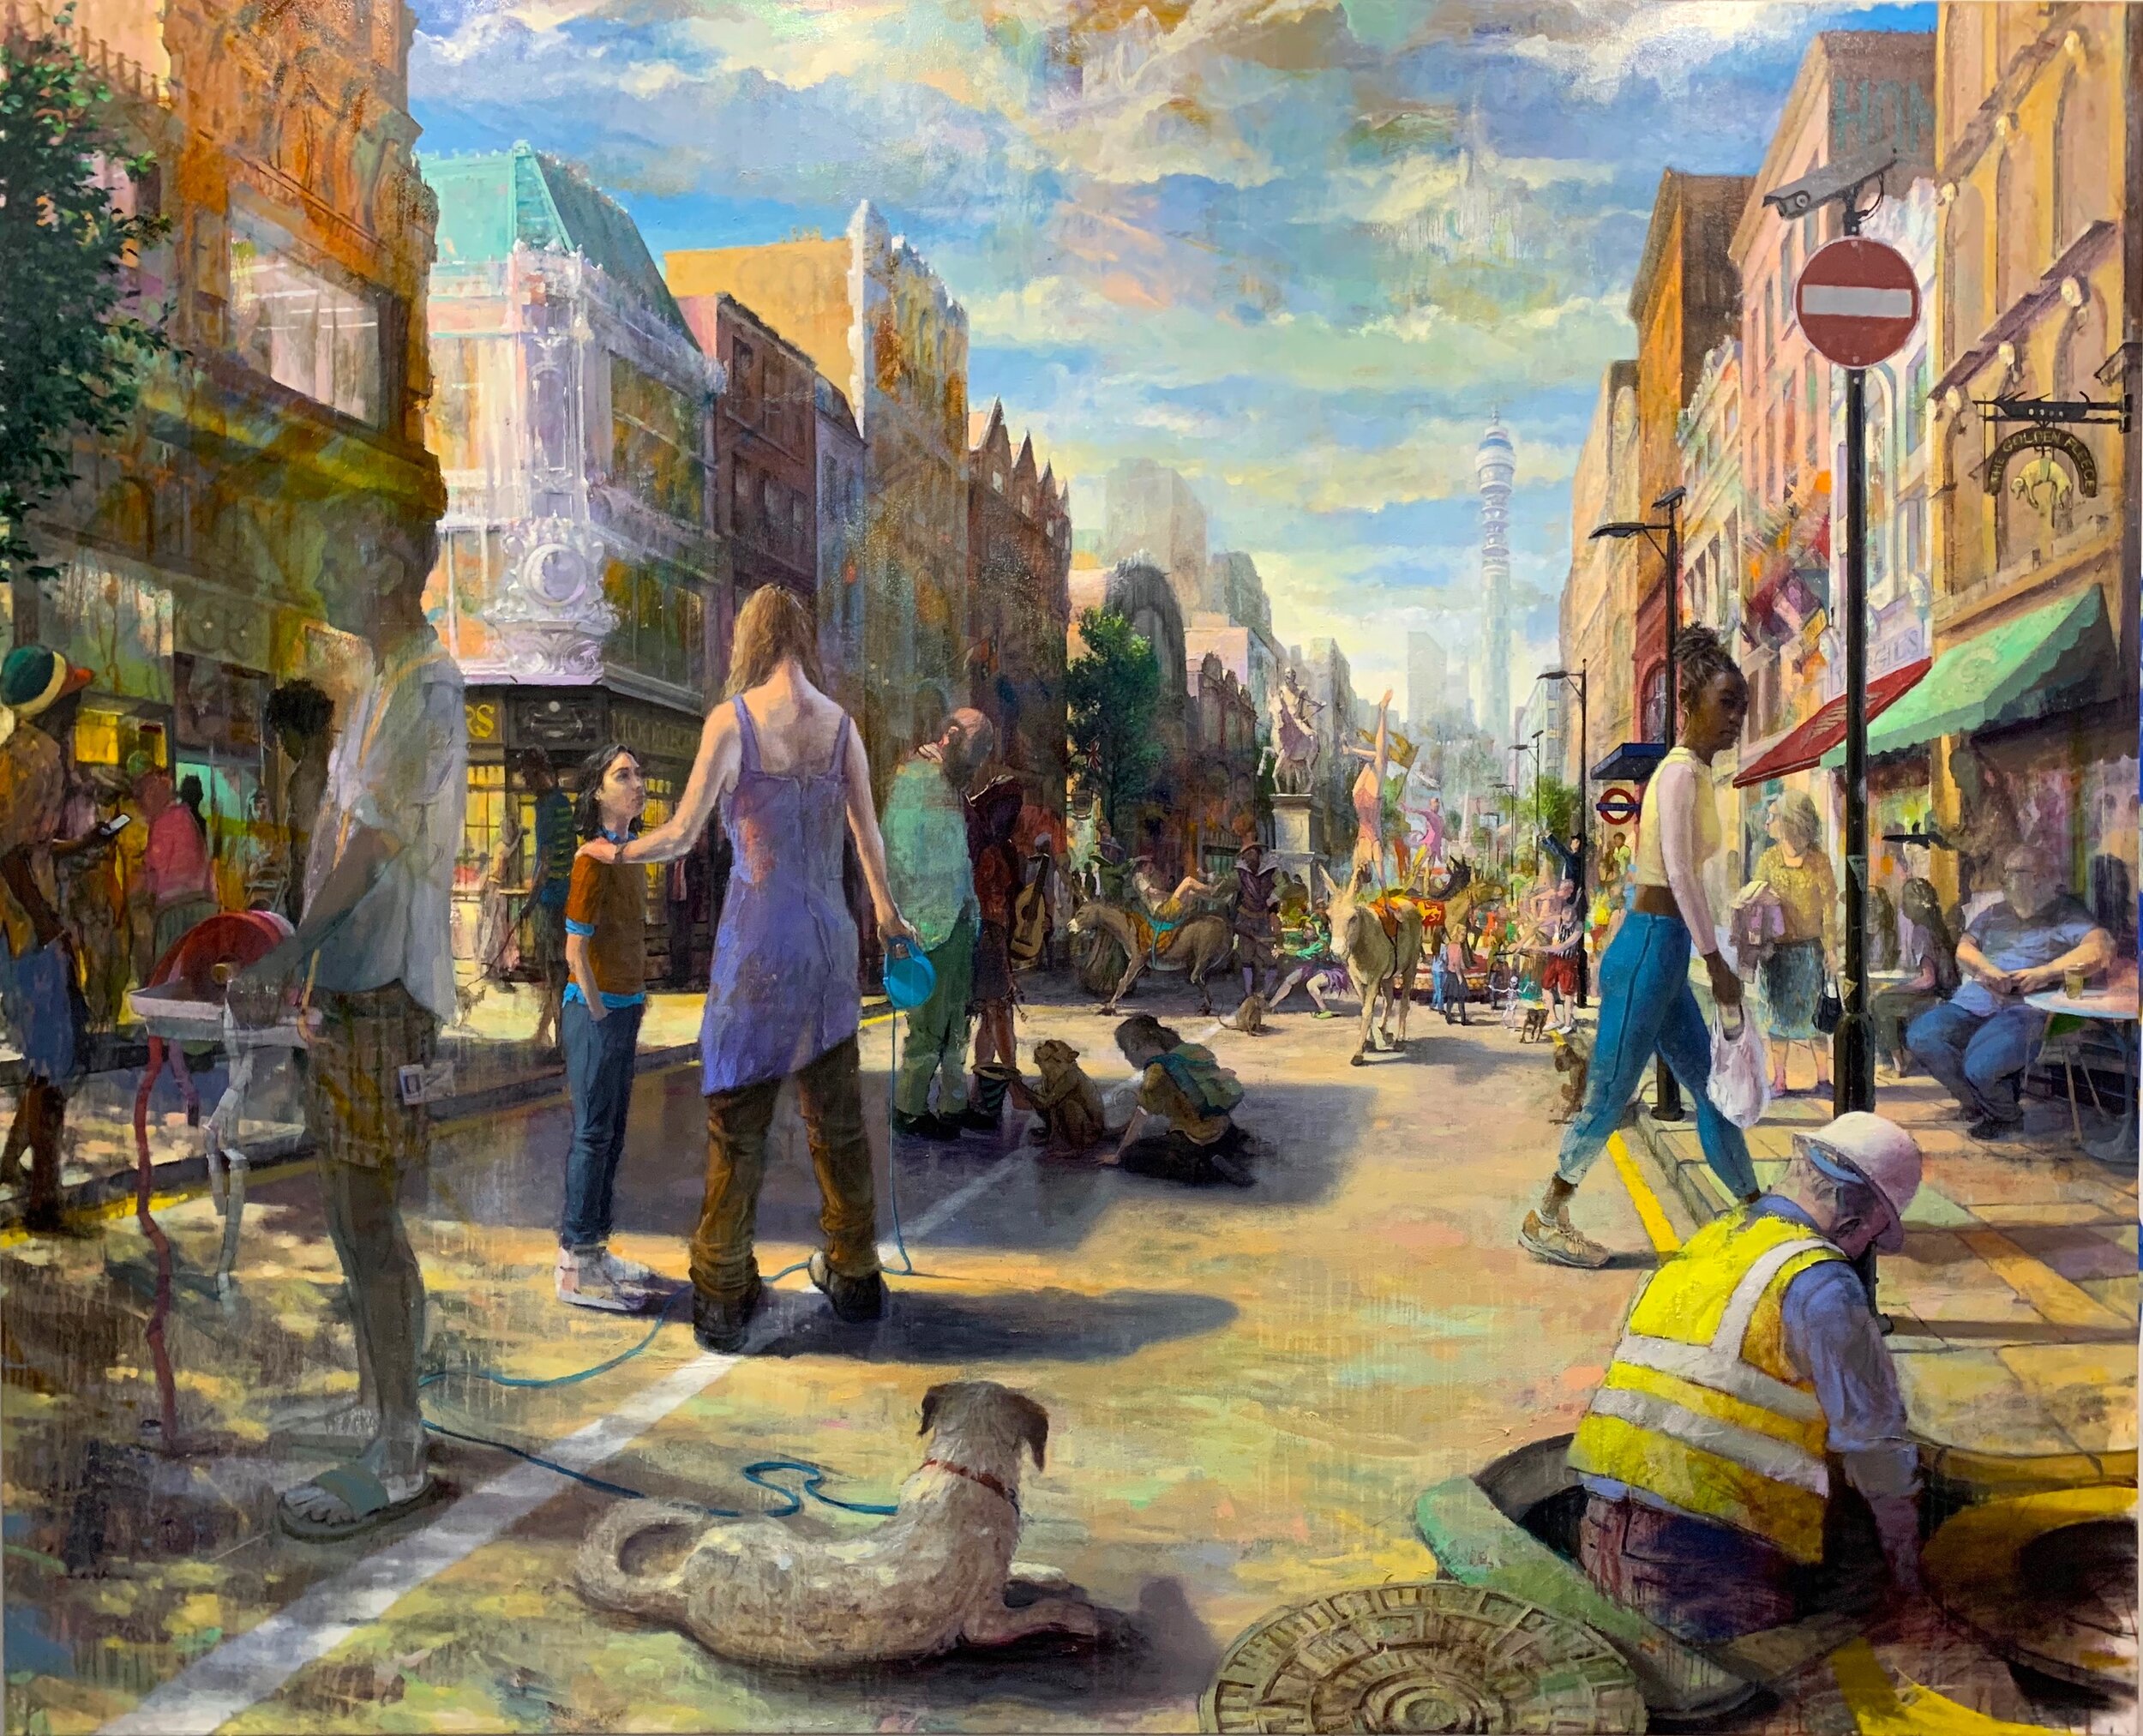    London Circus  , 2021  oil on canvas  78 x 96 in.   